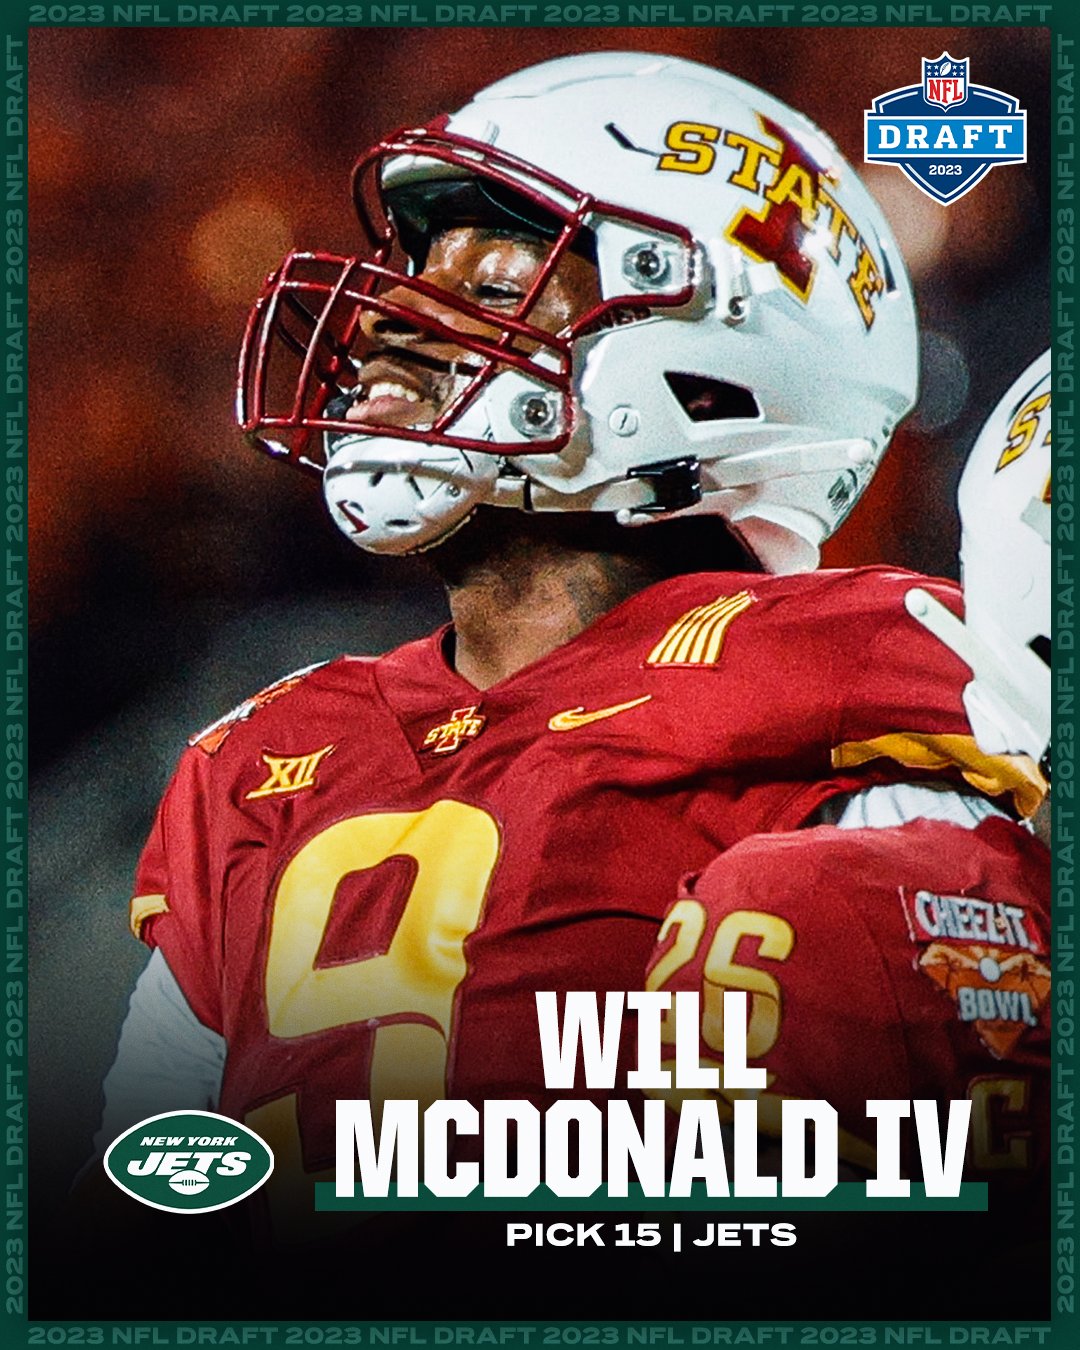 SportsCenter on X: 'With the 15th pick in the 2023 #NFLDraft, the Jets  select Will McDonald IV 